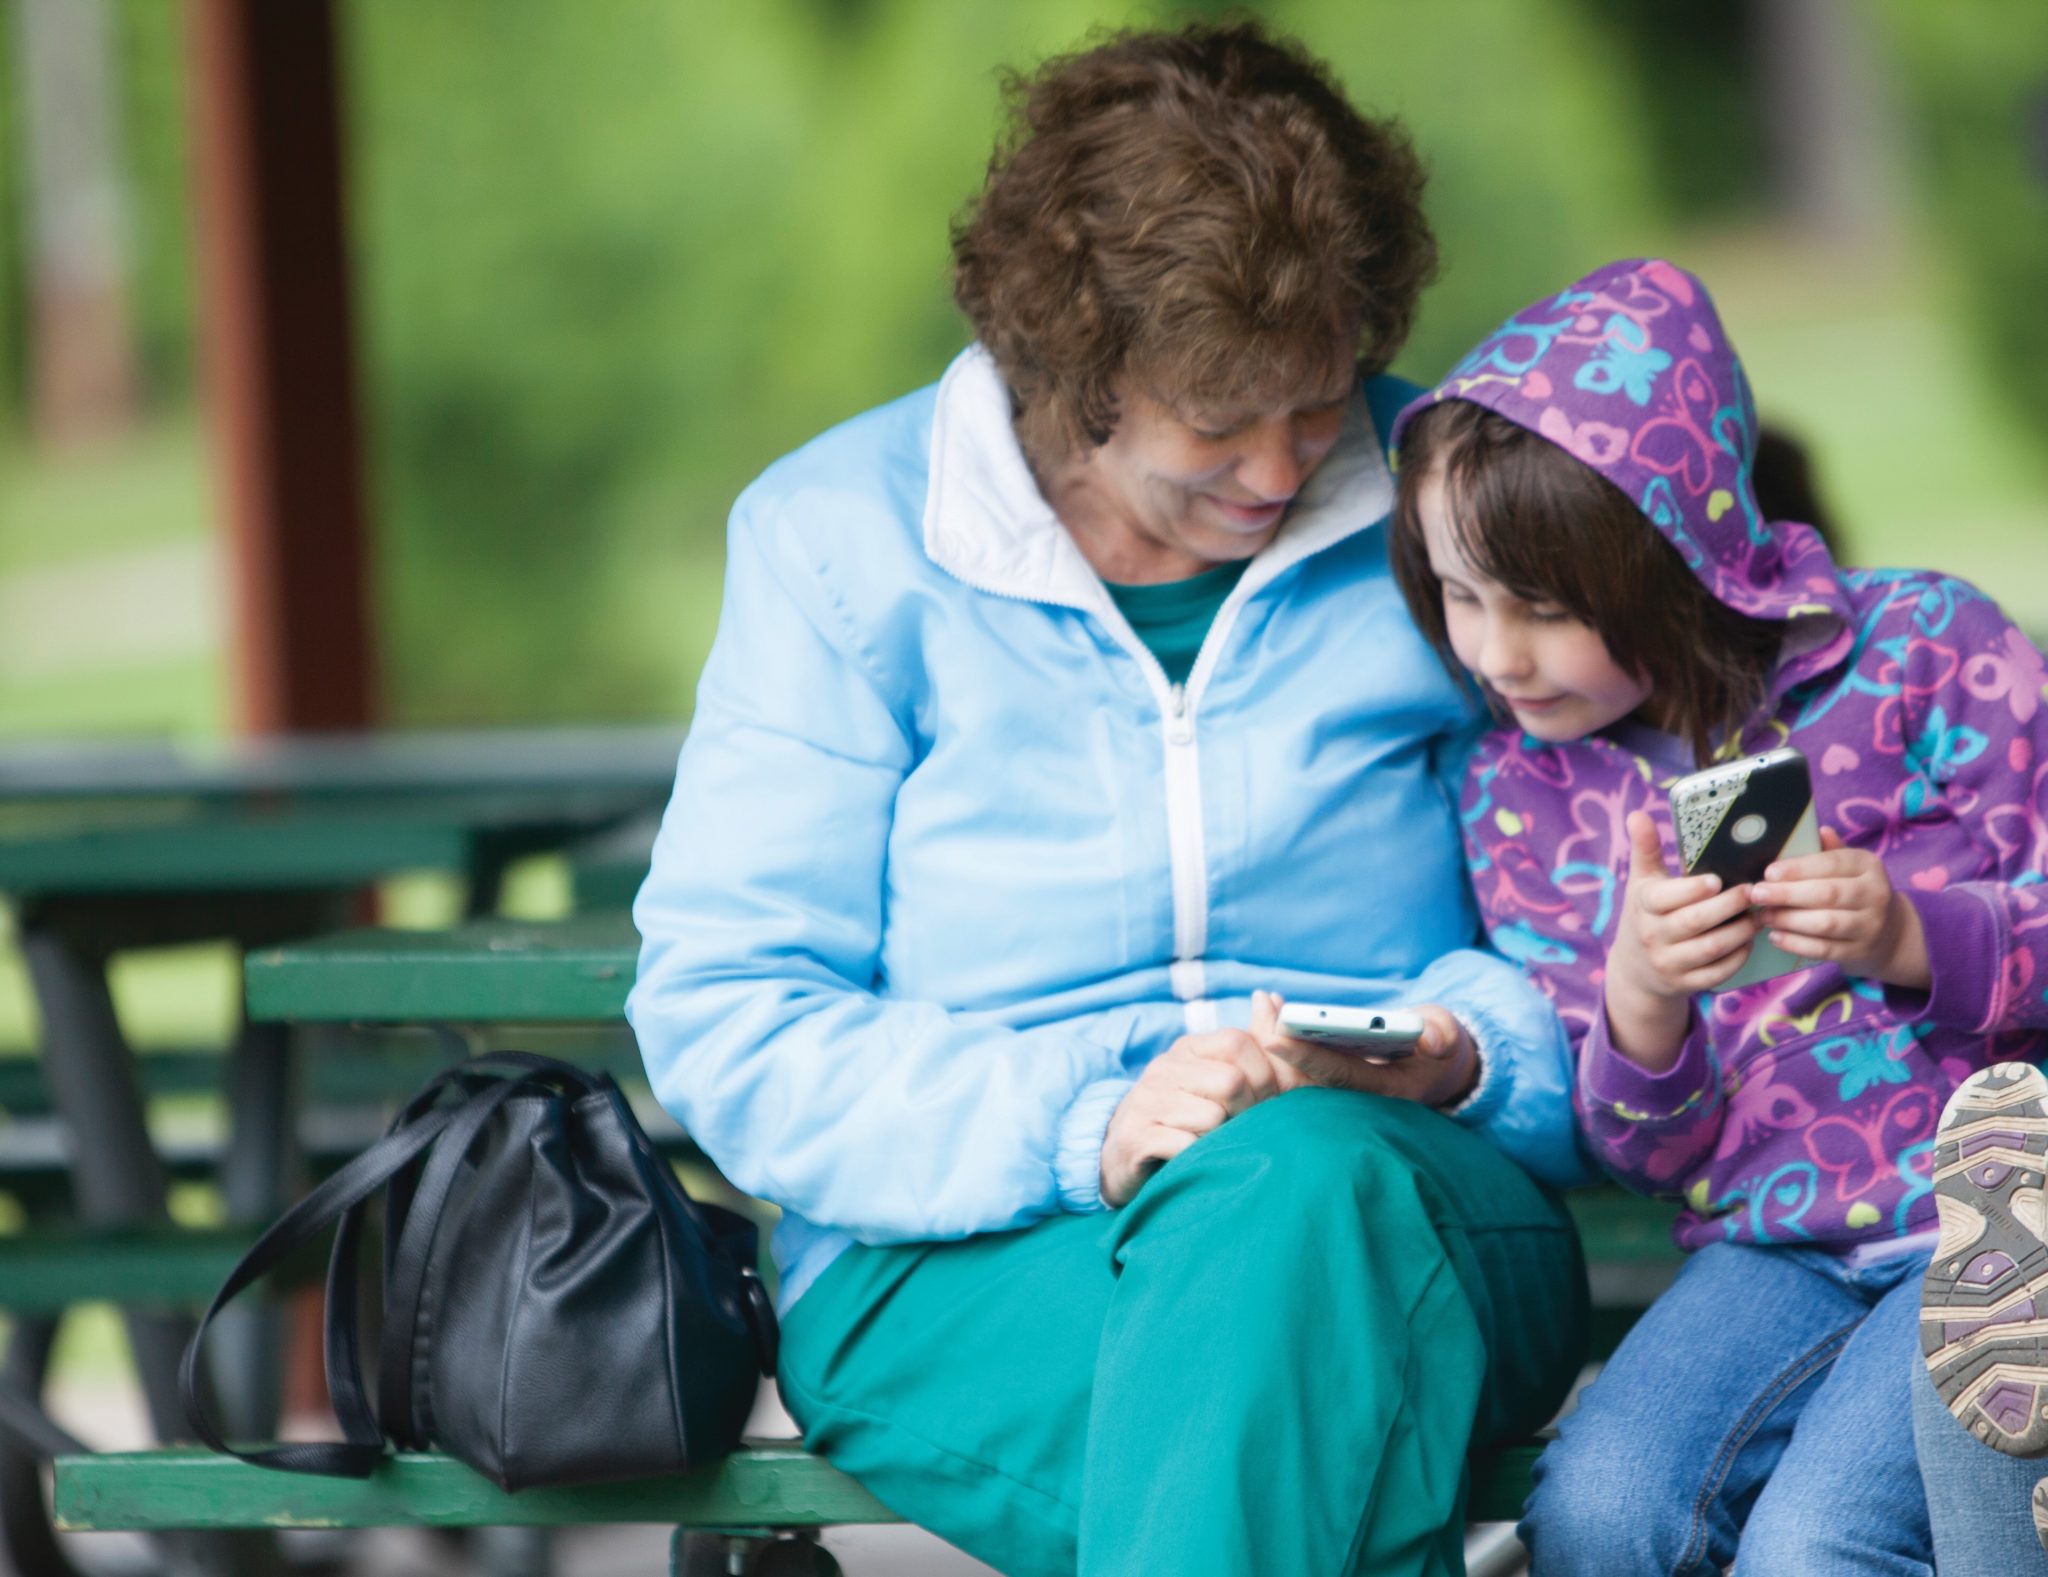 Young girl leans in close to older woman, looking at a phone.